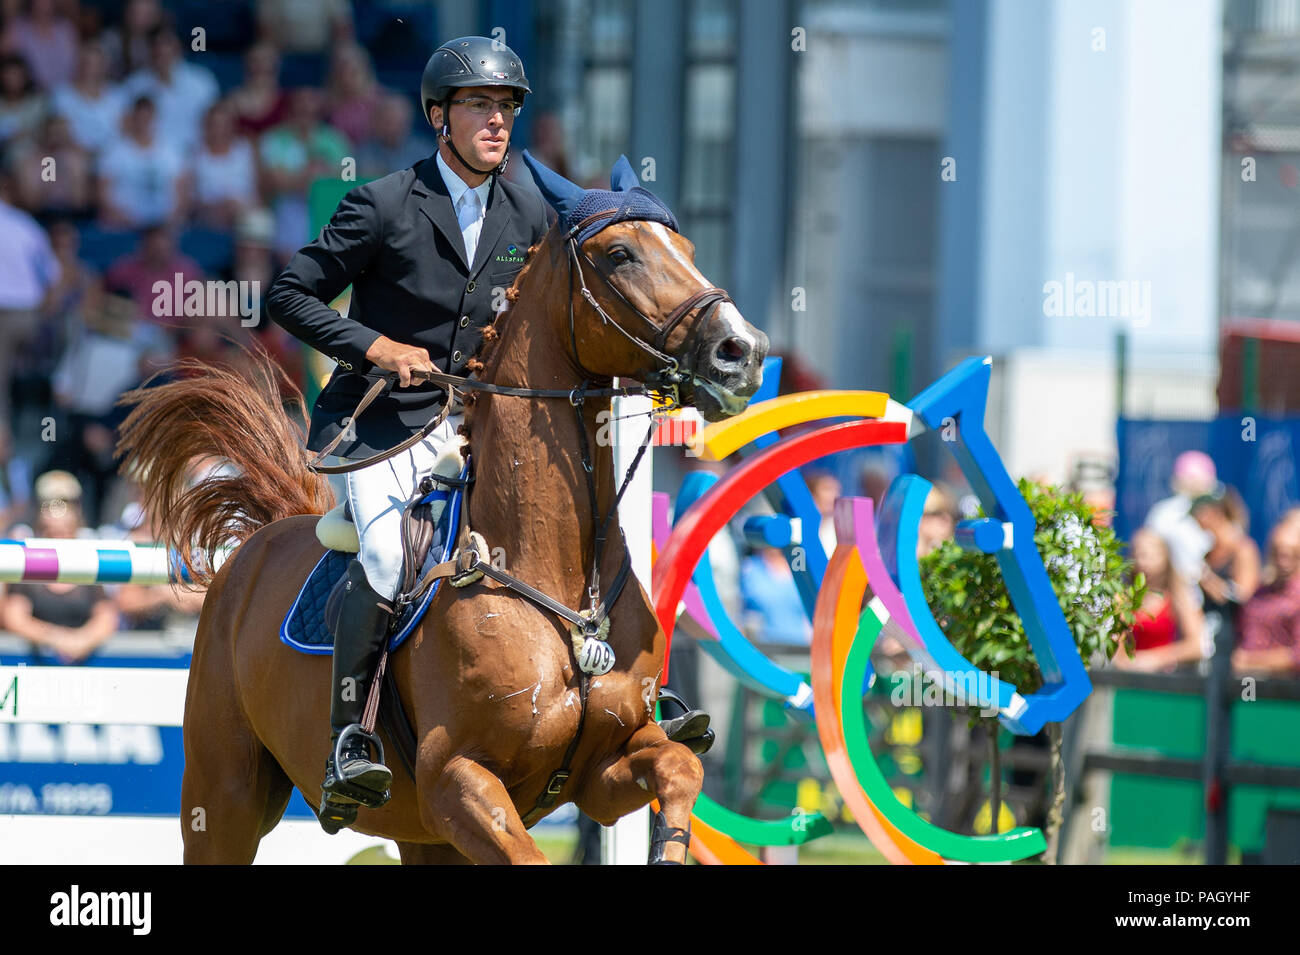 Aachen, Germany. July 22, 2018 - Michael KOLZ (GER) riding DSP Anpowikapi during the Rolex Grand Prix - CHIO Aachen 2018. Aachen, Germany, July 22th 2018. (Credit Image: © AFP7 via ZUMA Wire) Stock Photo